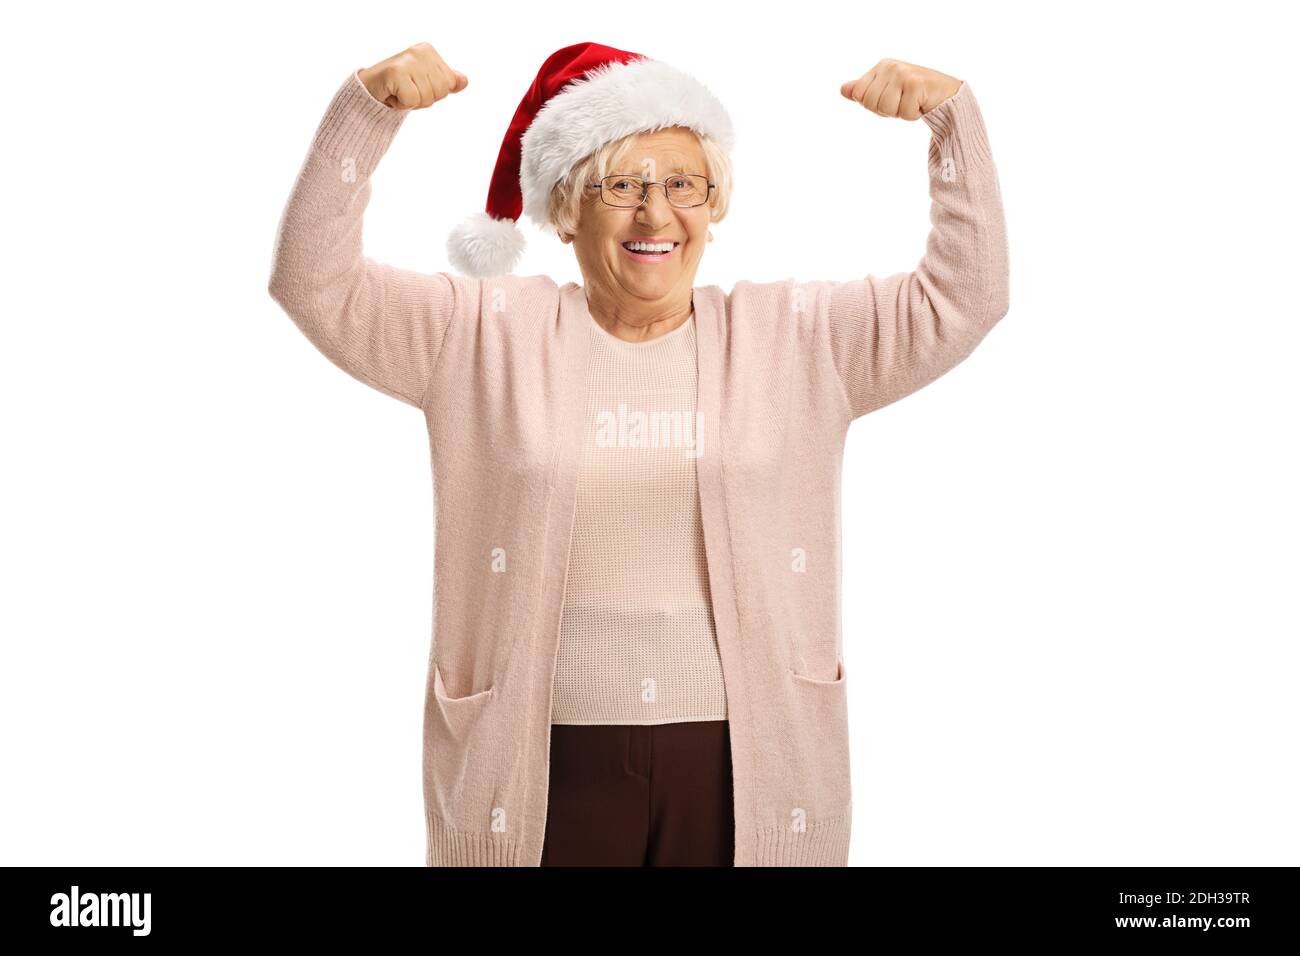 Cheerful mature woman showing muscles and wearing a christmas santa hat isolated on white background Stock Photo